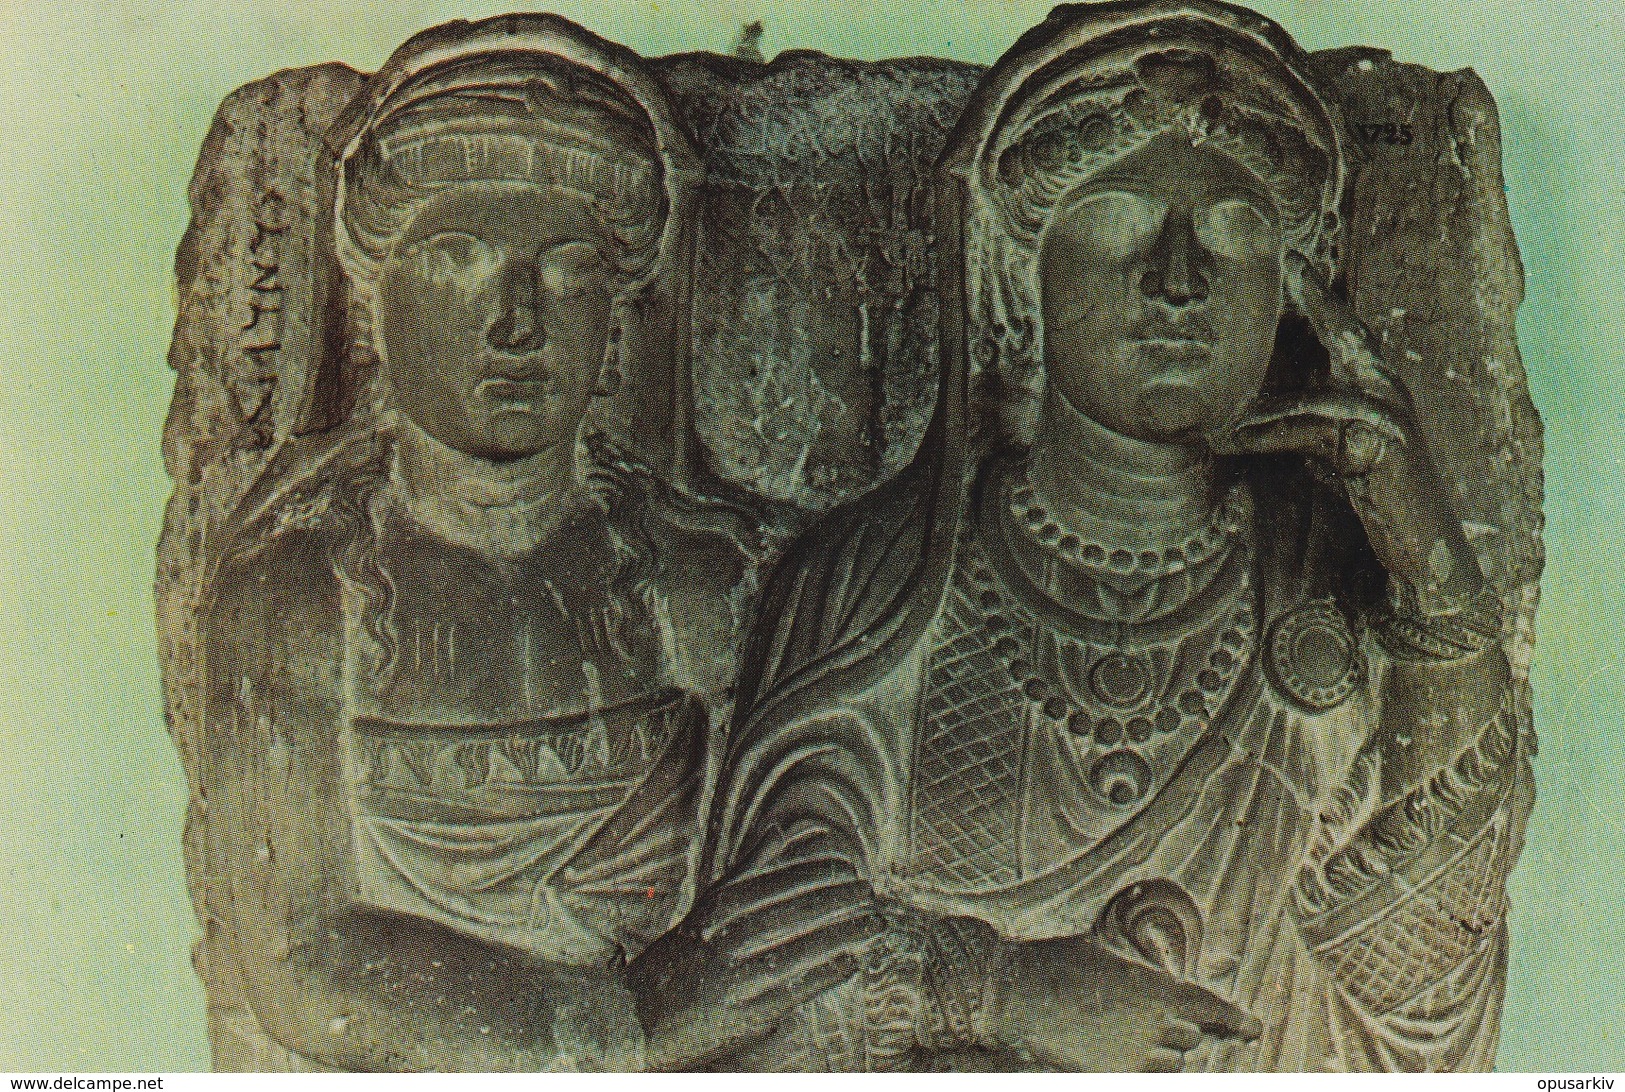 Turkey - 1970/80 - Postcard: Archeology | Palmyrene Funerary Relief, Istanbul Archaeological Museum * - Turquie